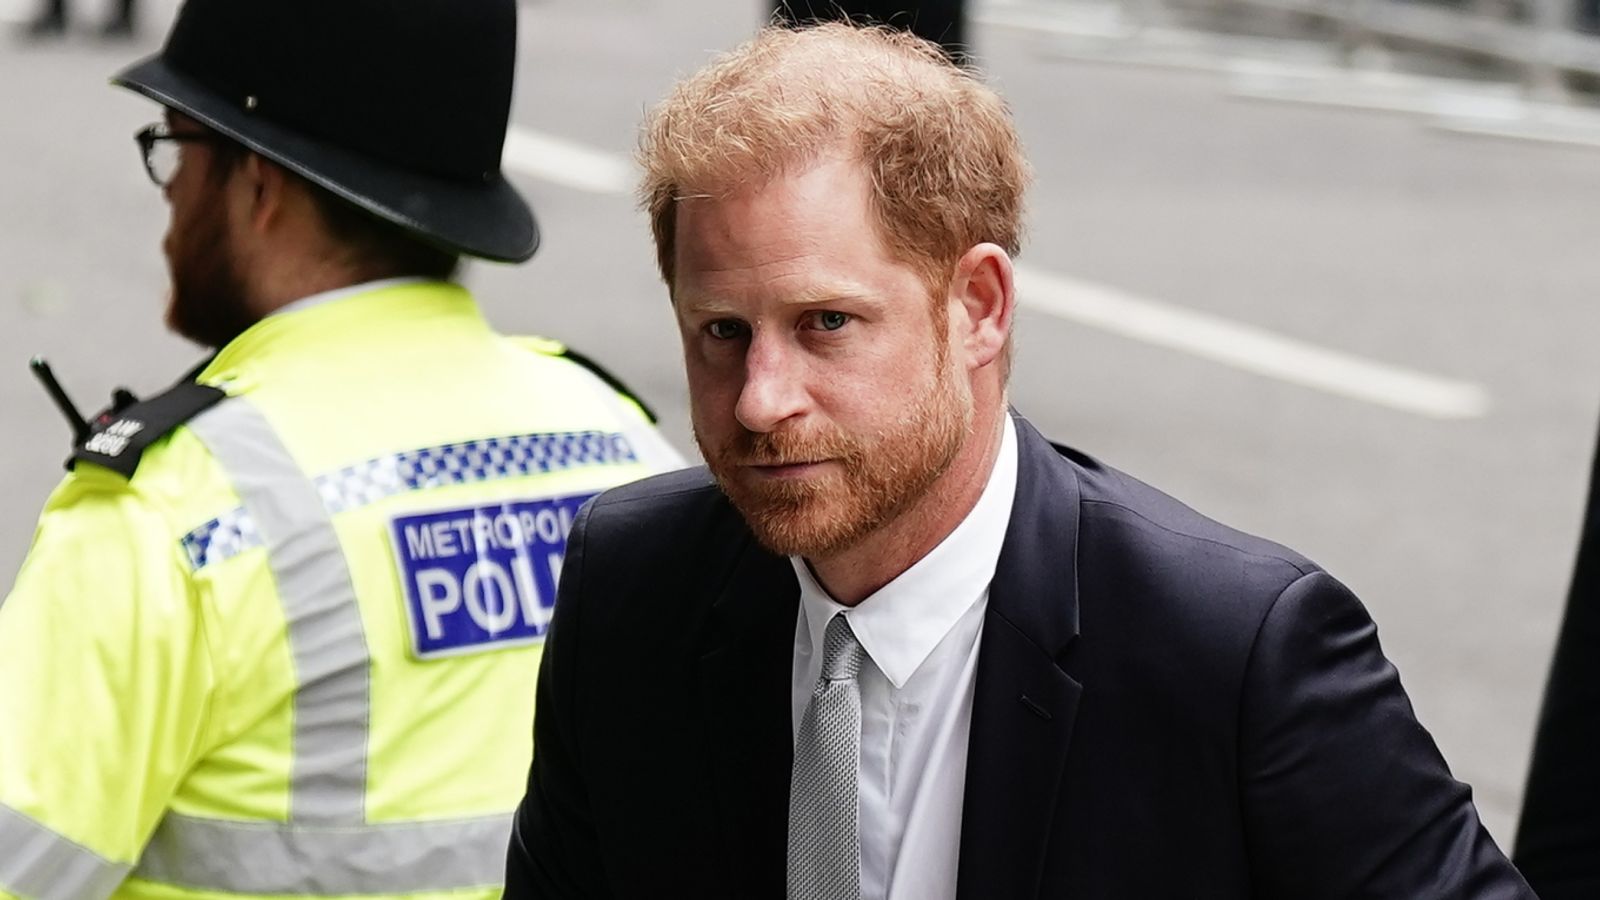 Prince Harry in court: William's prank call, strip club visit, and Chelsy Davy break-up - duke faces more questions from Mirror publisher's lawyer